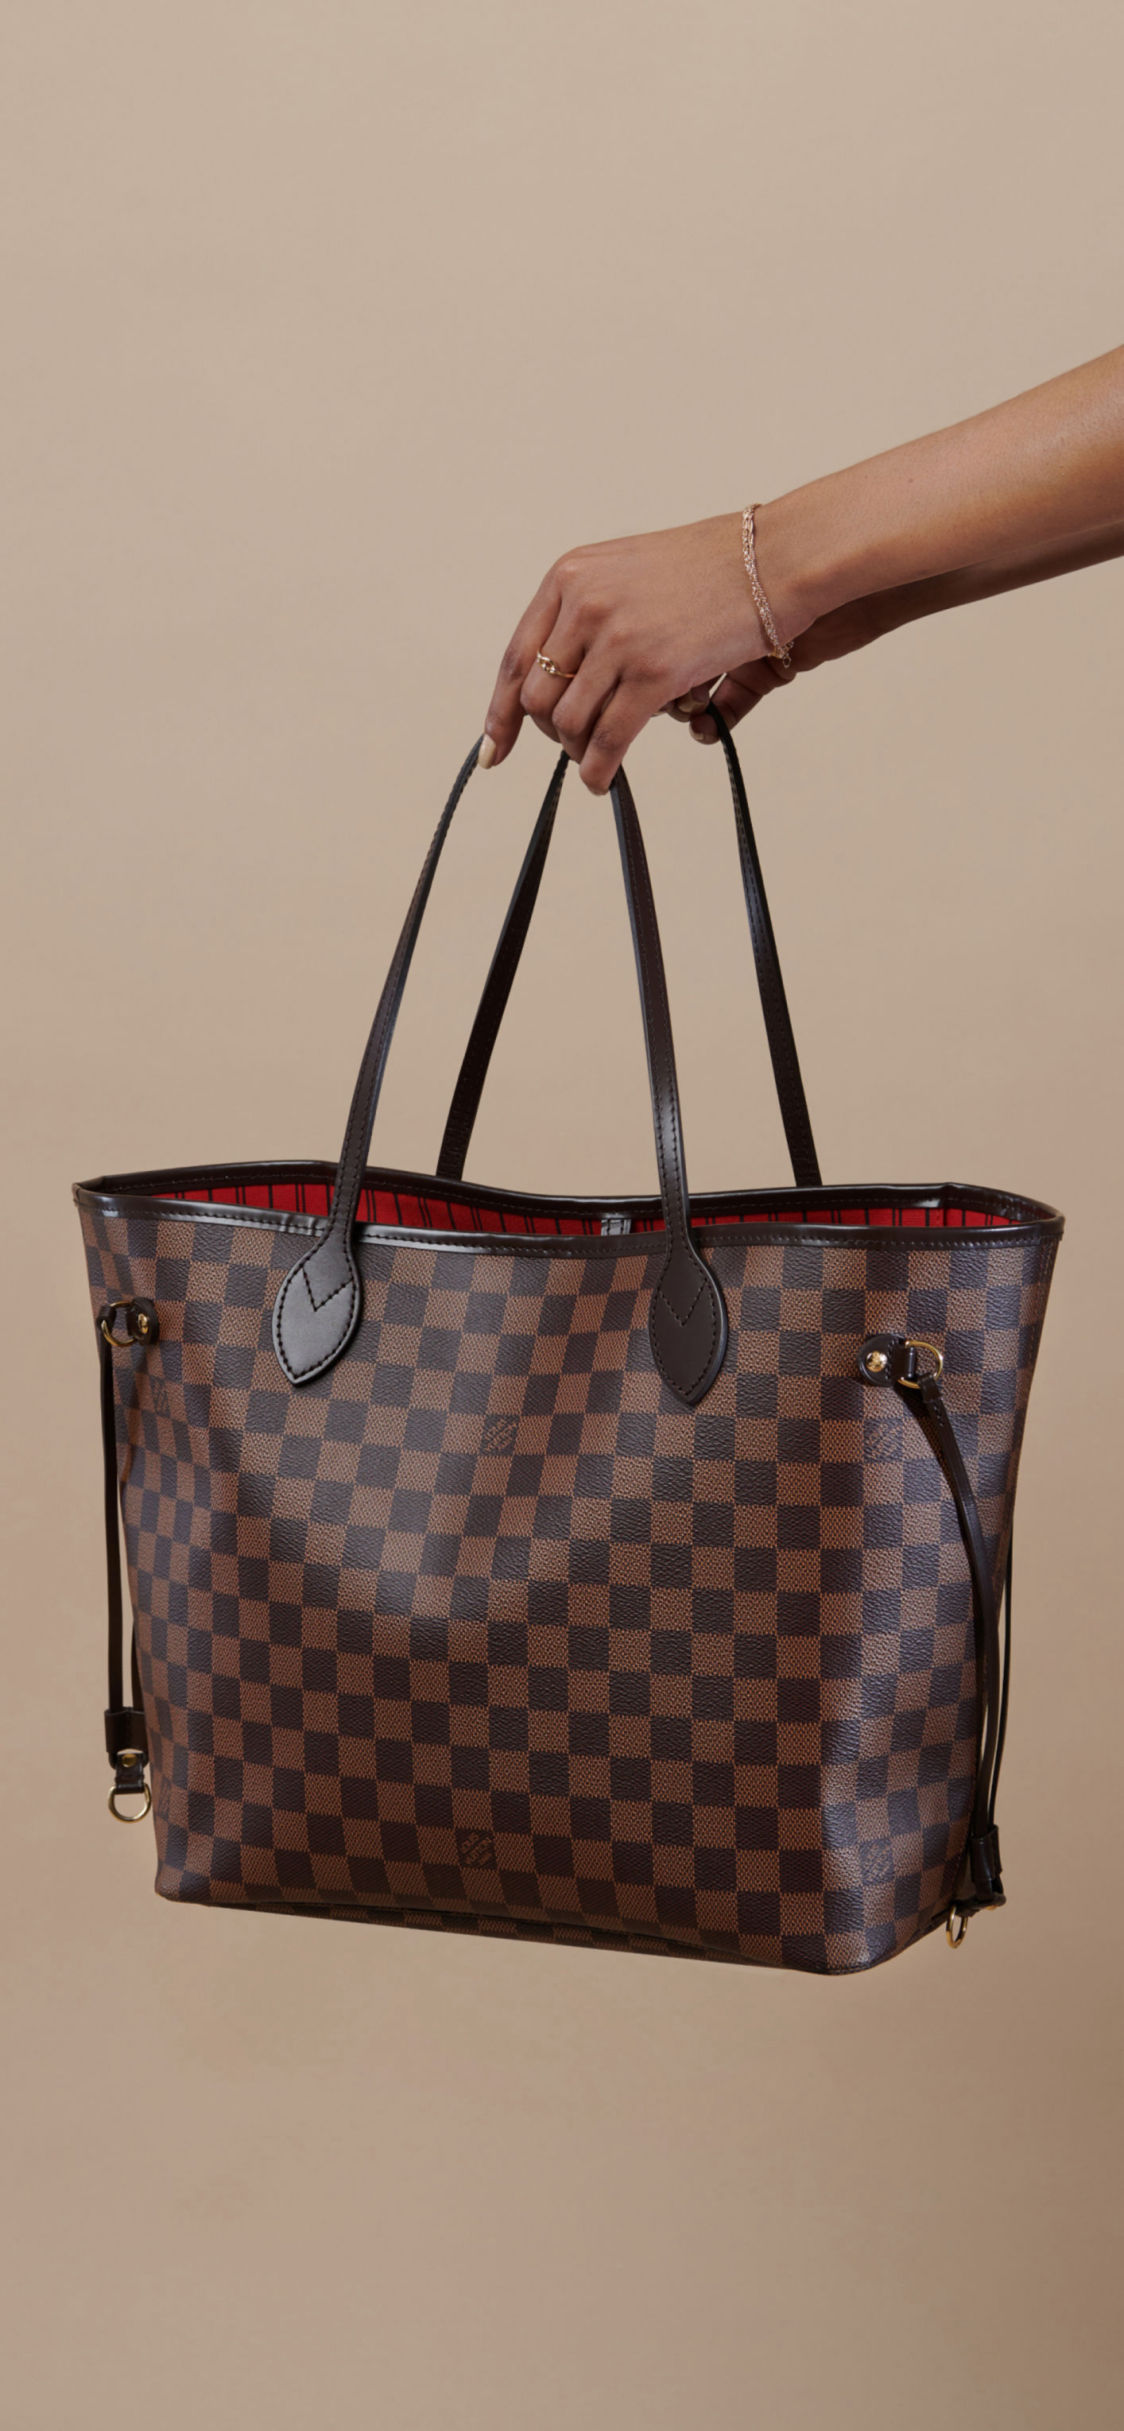 How To Clean Lv Leather Purse With